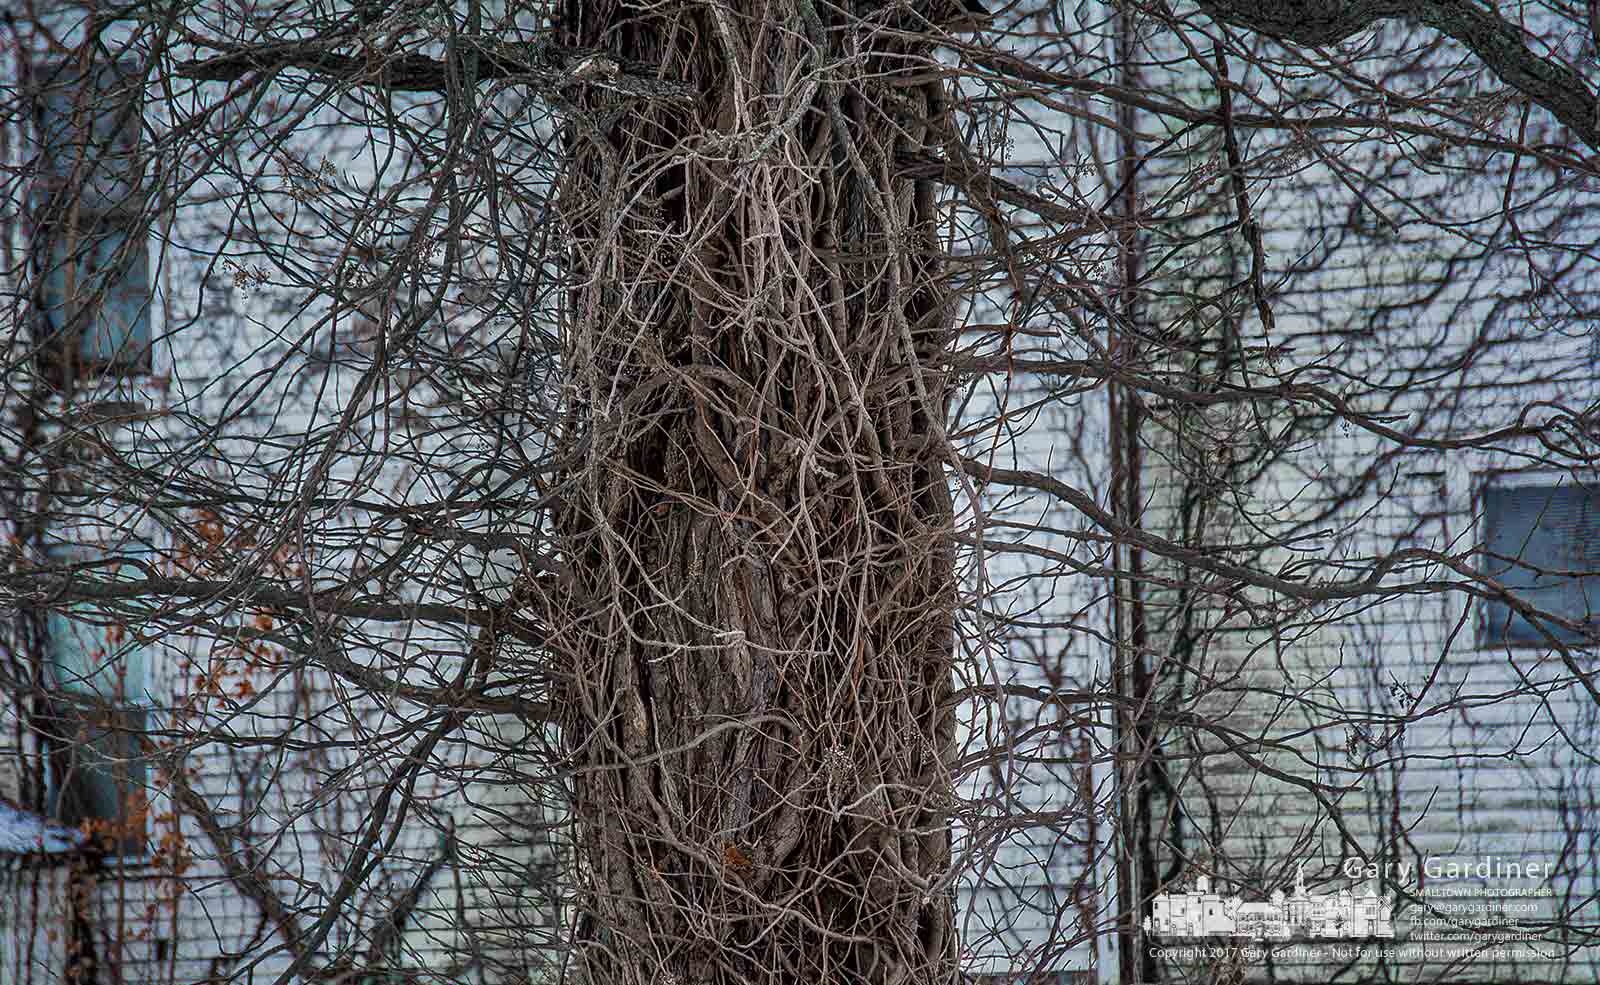 Poison Ivy tendrils exposed in the cold of winter spread from one of the trees at the entrance to the Braun Farm. My Final Photo for Dec. 26, 2017.